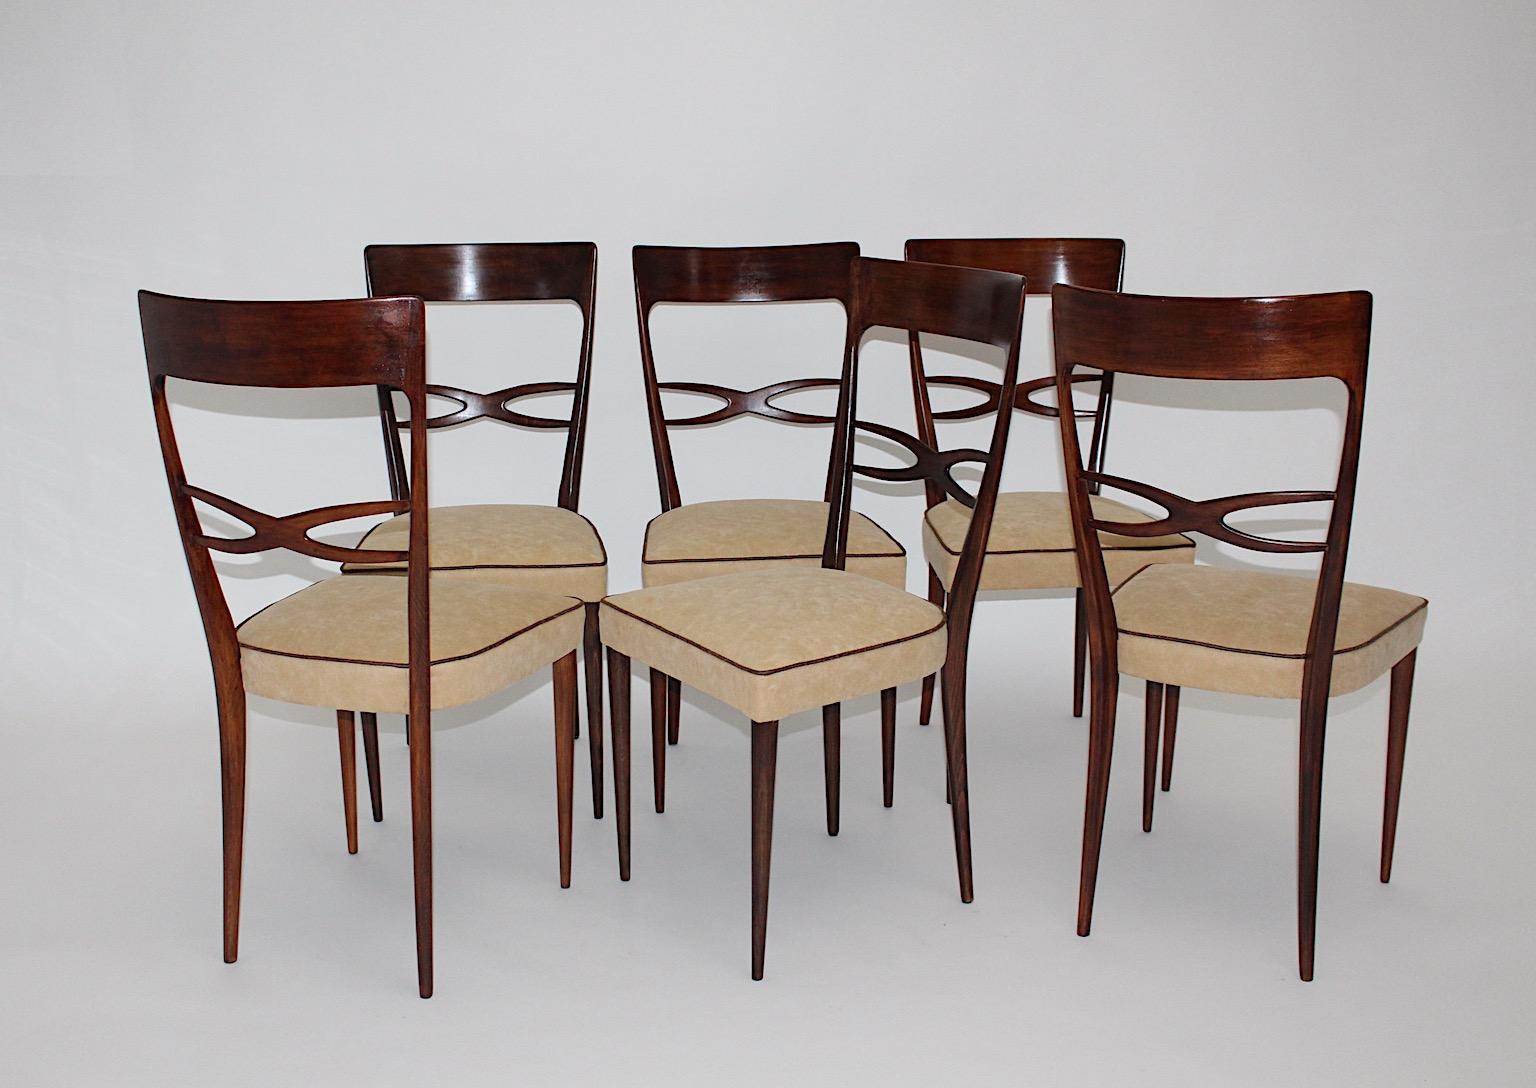 20th Century Mid-Century Modern Six Dining Chairs Brown Beech Melchiorre Bega, 1950, Italy